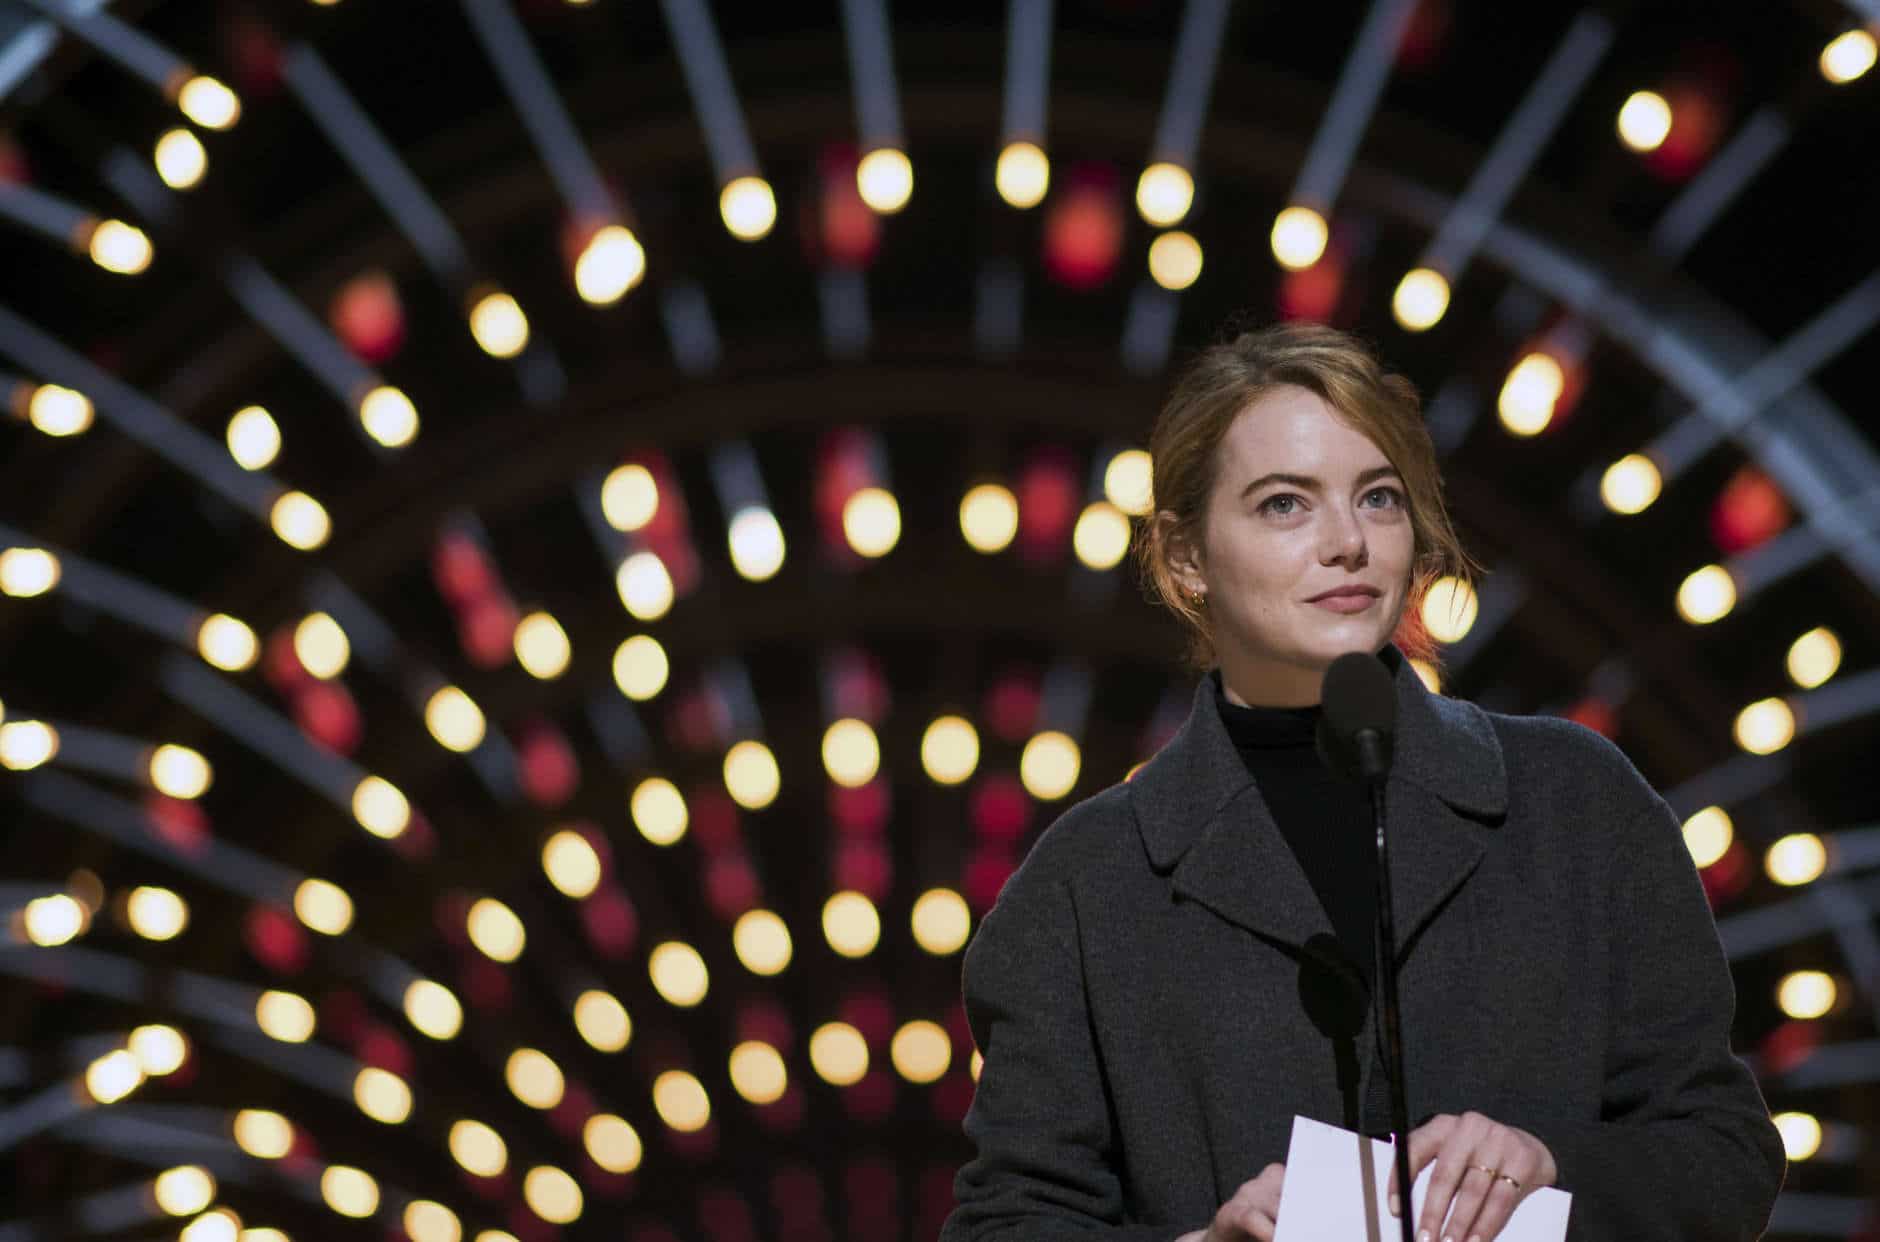 Emma Stone appears during rehearsals for the 90th Academy Awards in Los Angeles on Saturday, March 3, 2018. The Academy Awards will be held at the Dolby Theatre on Sunday, March 4. (Photo by Charles Sykes/Invision/AP)